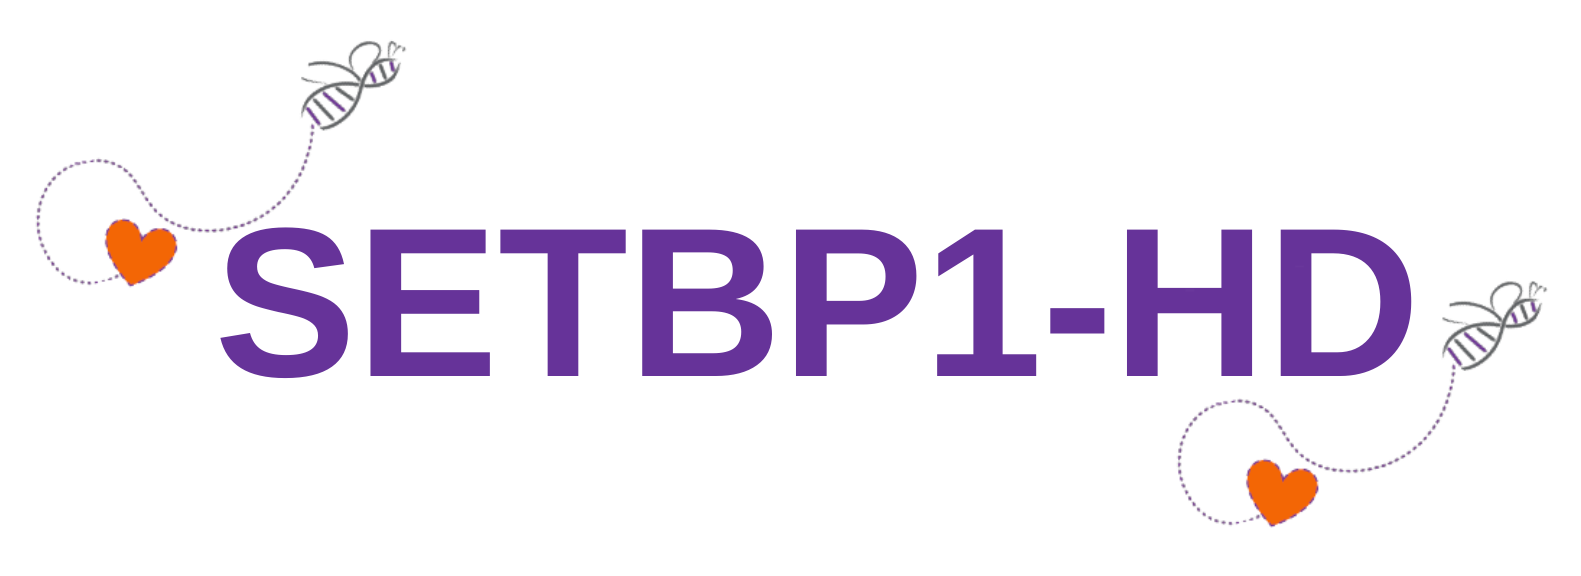 SETBP1-HD – what does this mean?